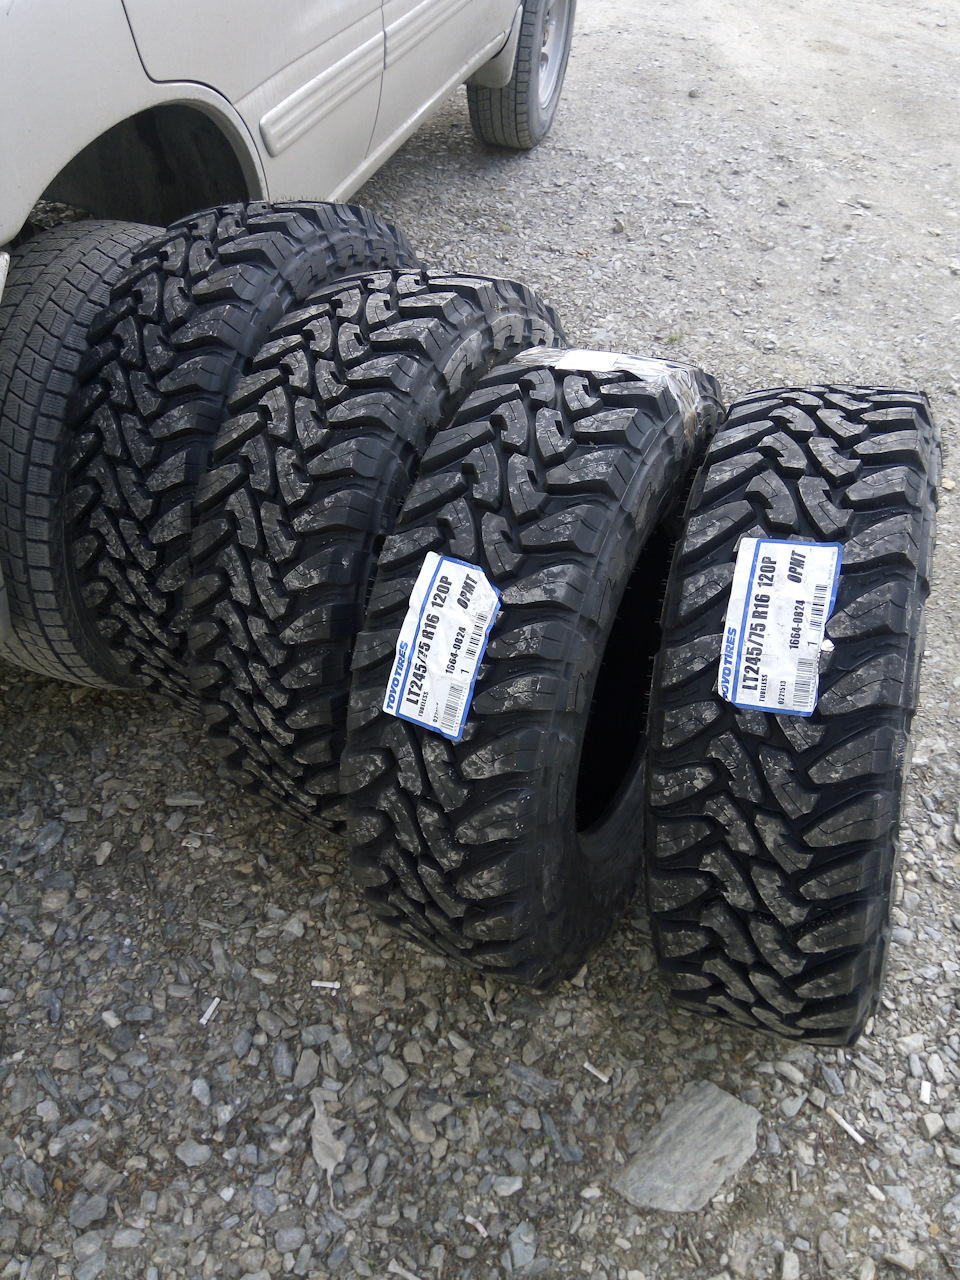 Toyo open country m. 265/75 R16 МТ Toyo. Toyo MT 245/75 r16. Тойо опен Кантри МТ 225/75 r16. Toyo open Country m/t.